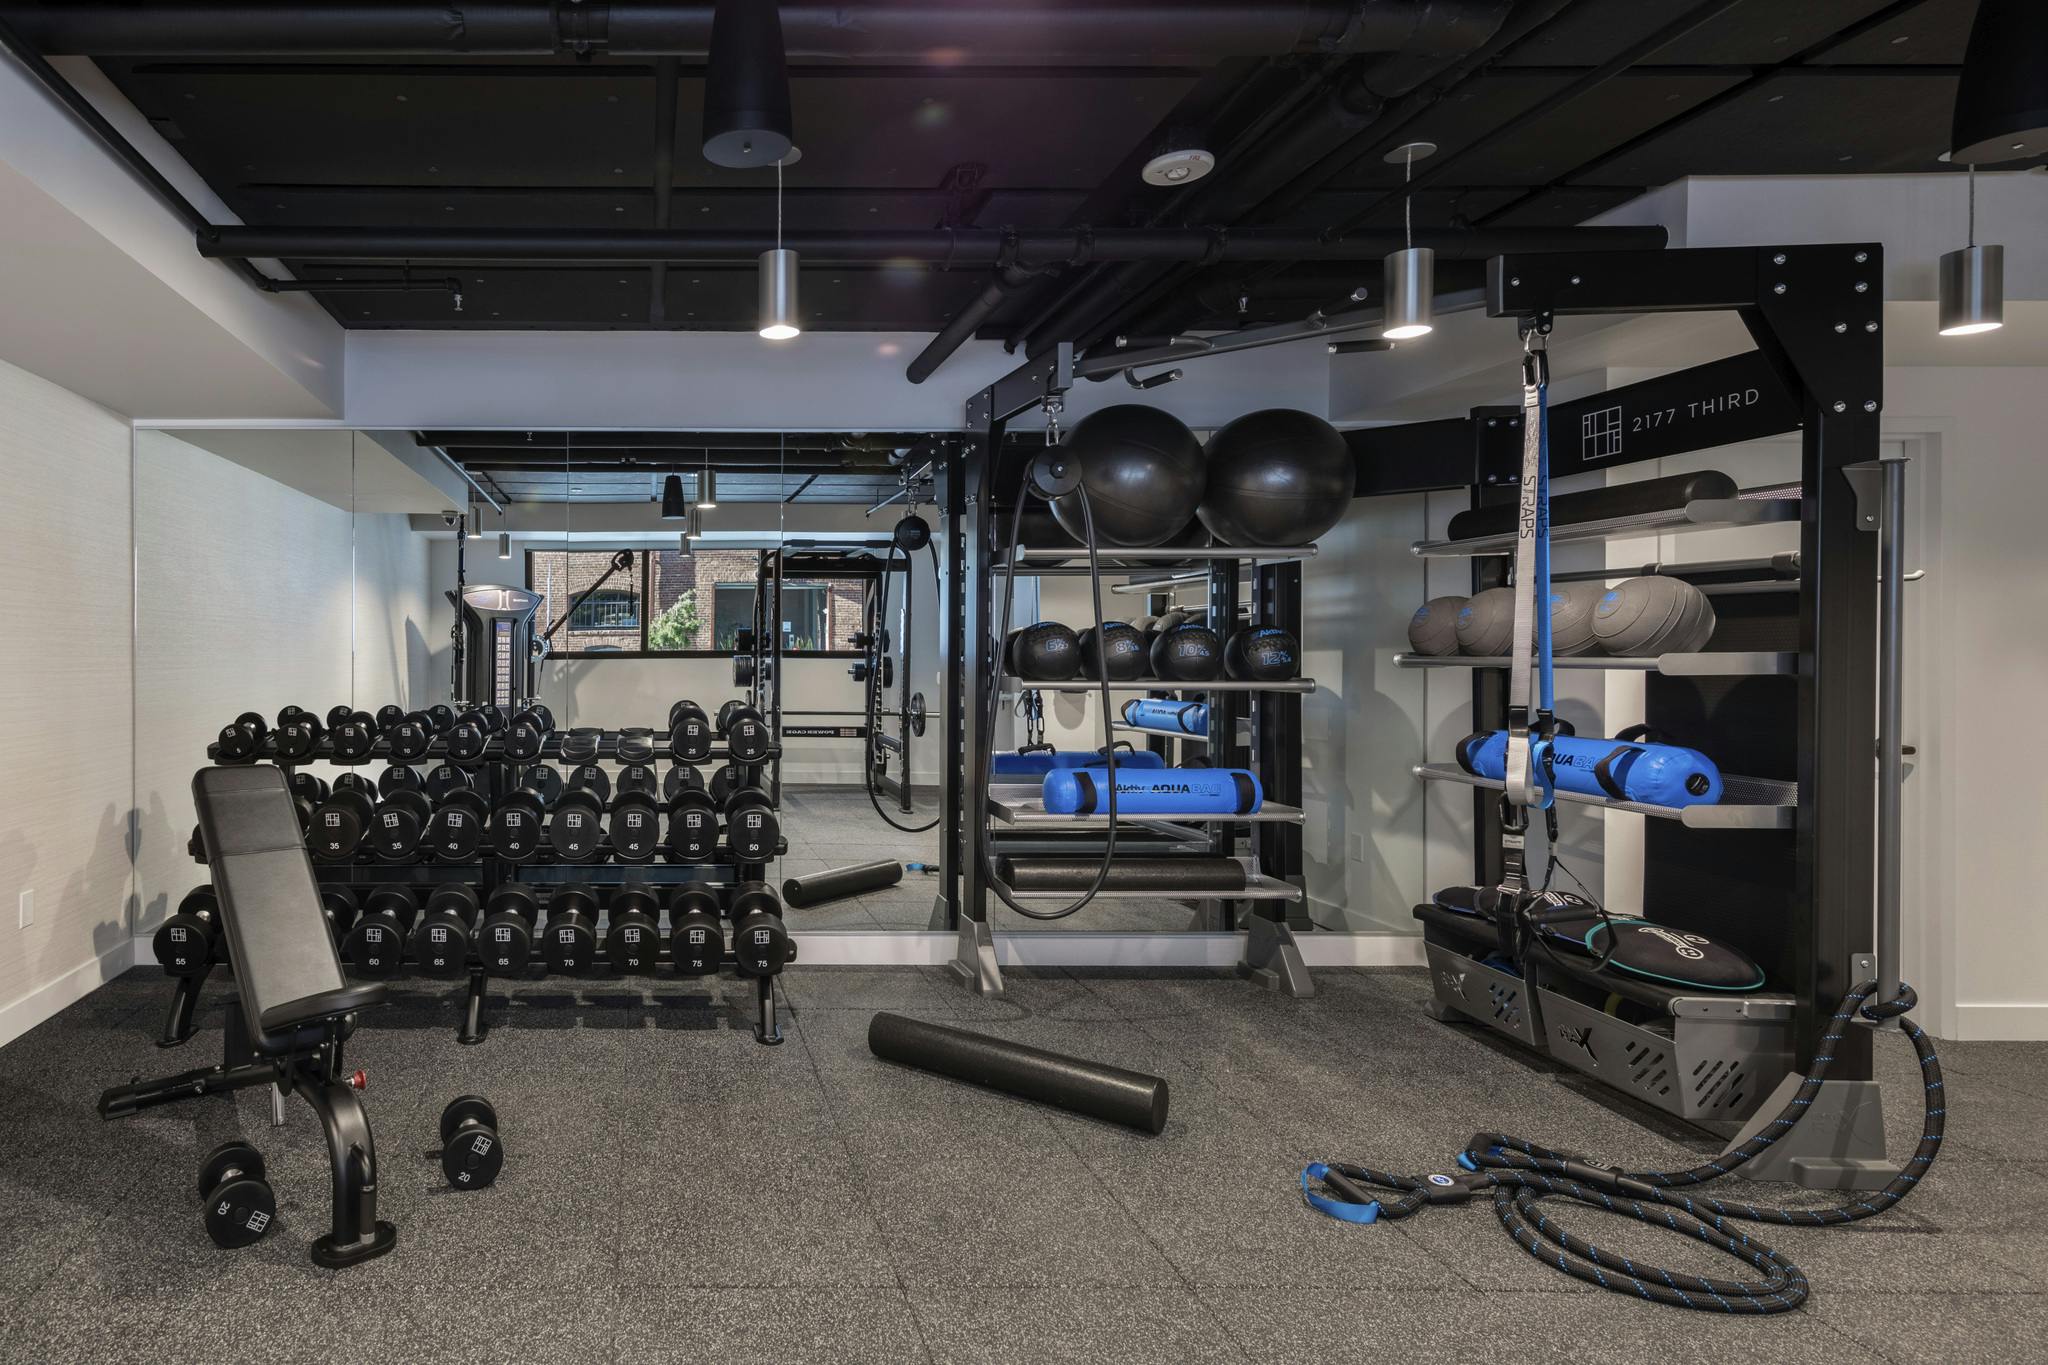 Along with numerous amenities available to residents, 2177 Third also boasts a private fitness studio and weight room.